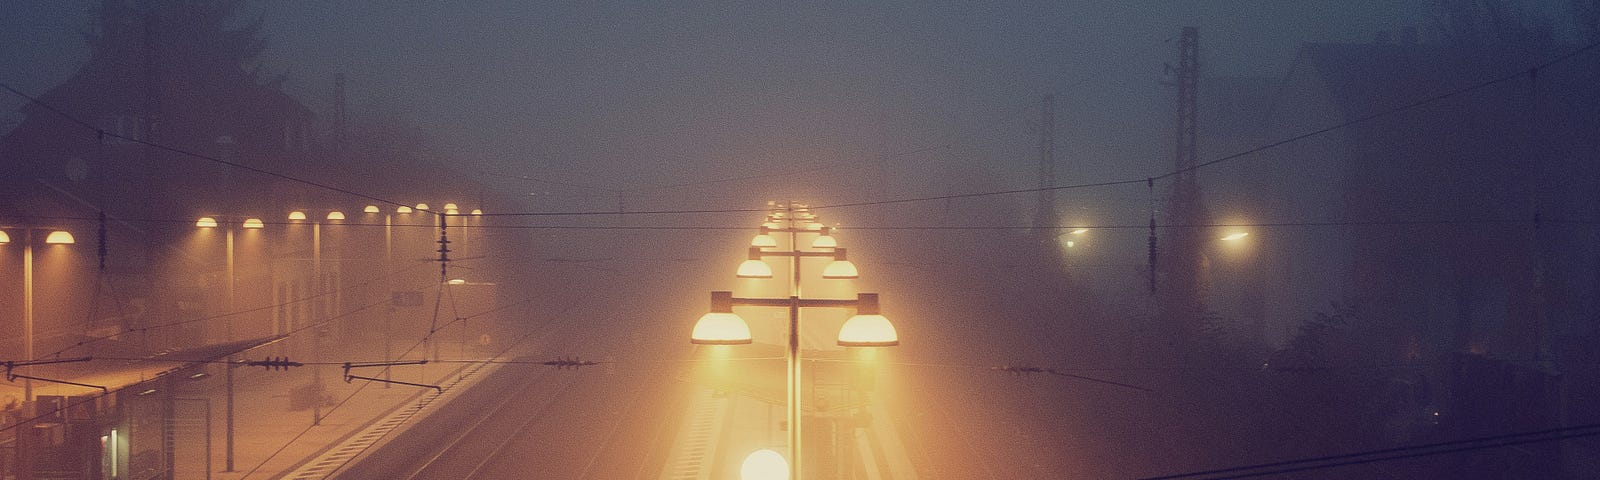 A foggy street in the late night or early morning.